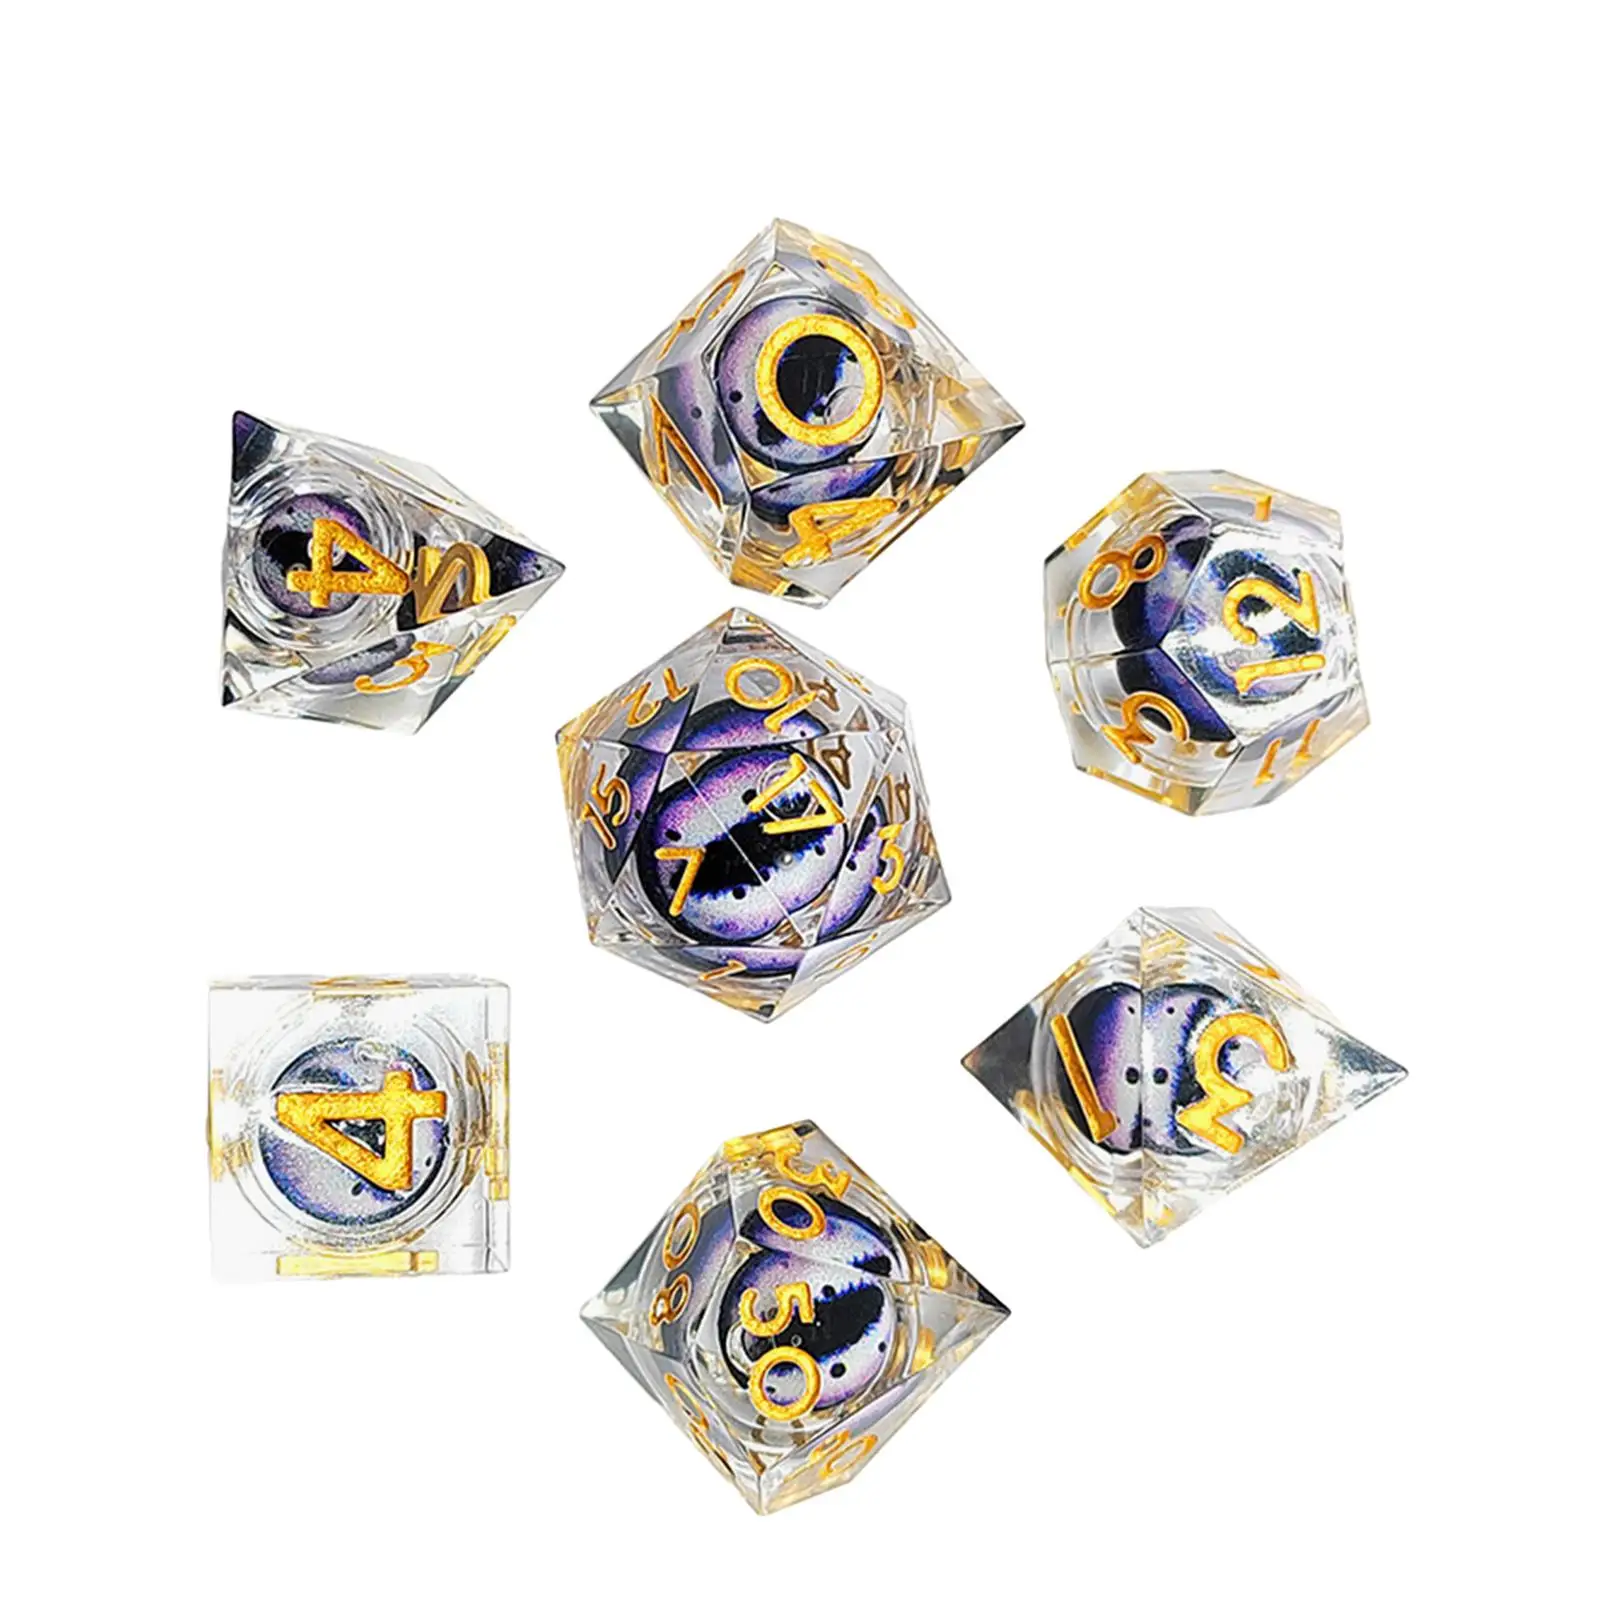 Polyhedral Eye Game Dice 7 Pieces Set Accessory for Teaching Projects